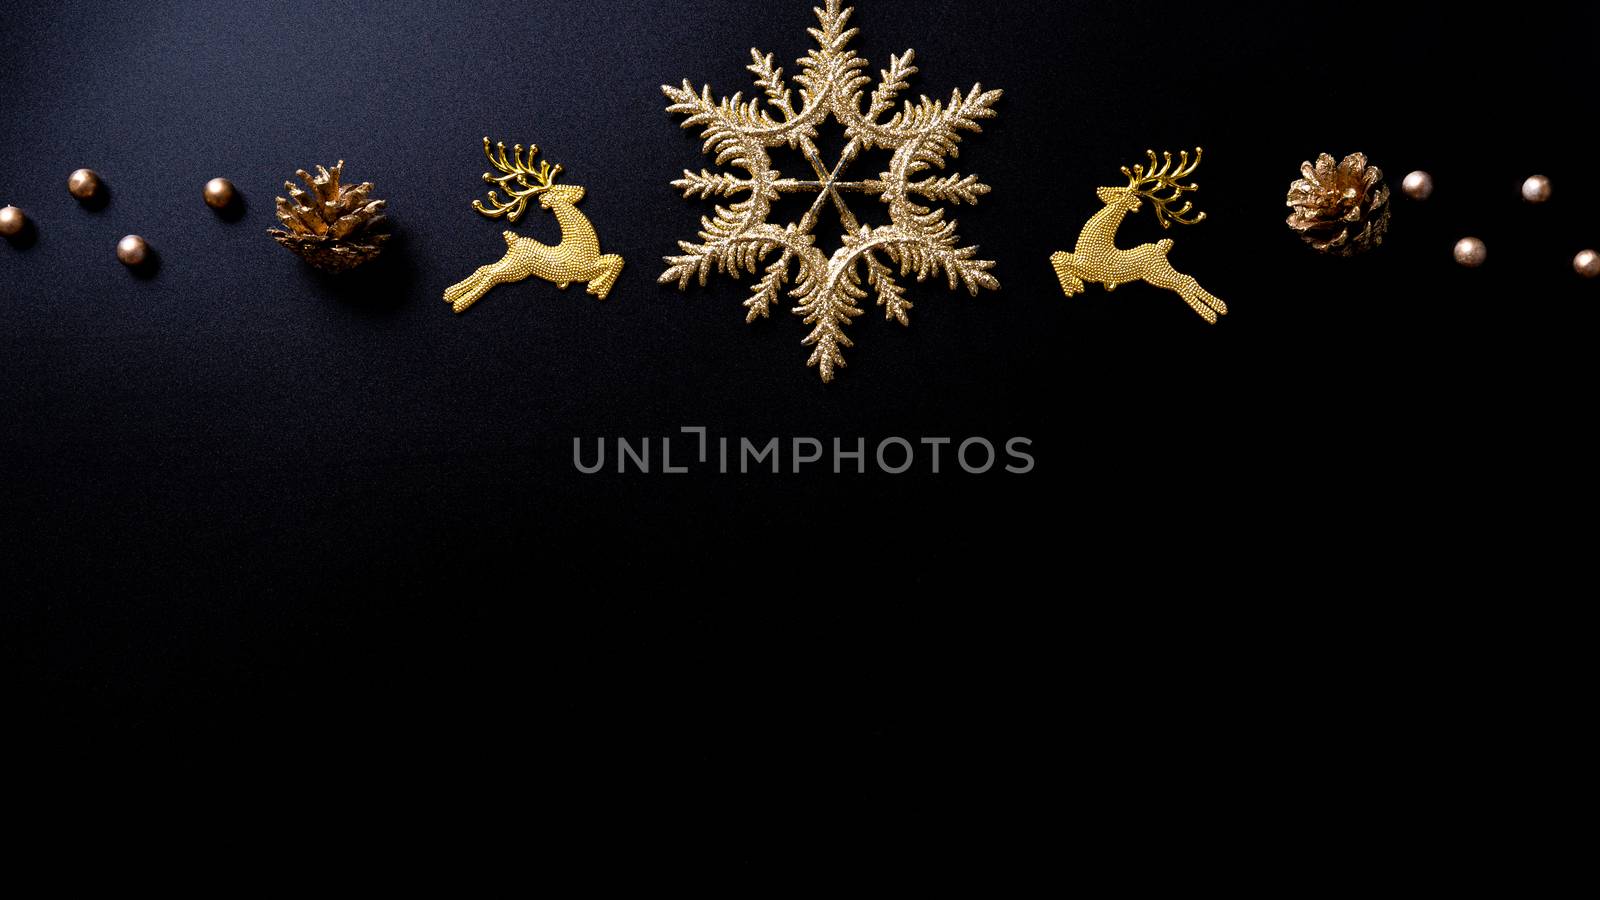 Christmas background. Top view of Christmas decorations on black background with copy space for text. Flat lay, winter, postcard template, new year concept.